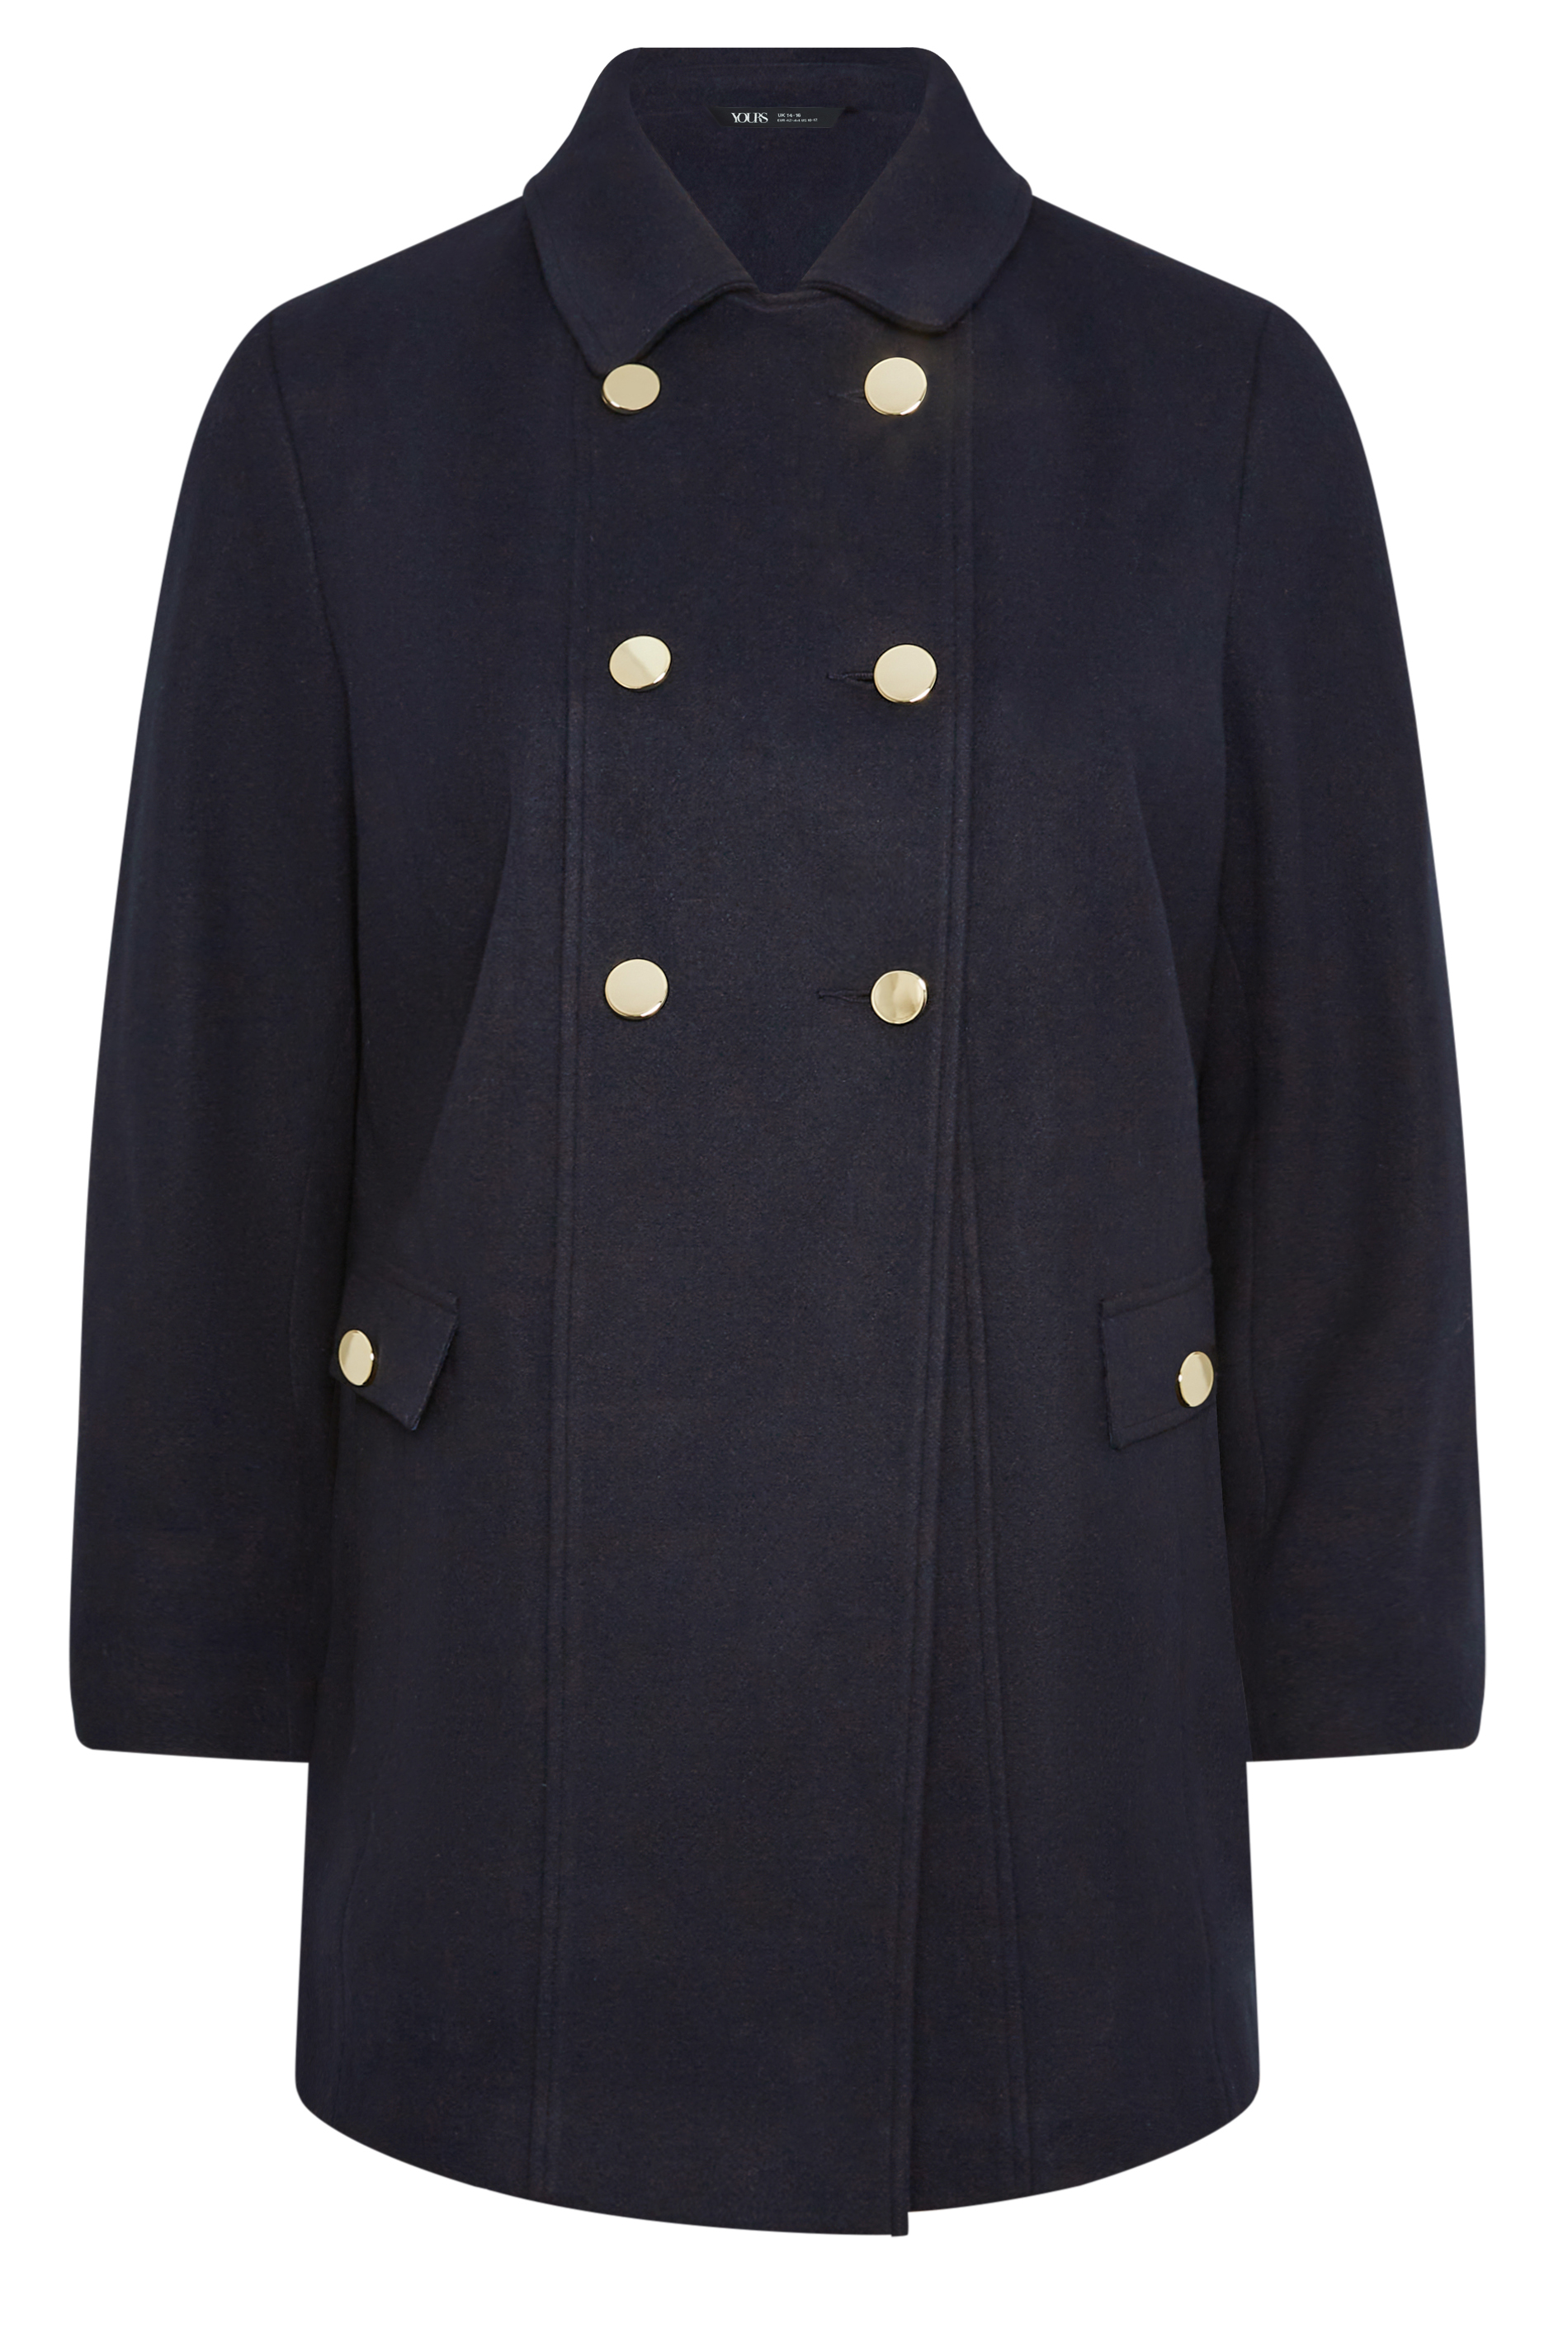 YOURS Plus Size Navy Blue Collared Formal Coat | Yours Clothing